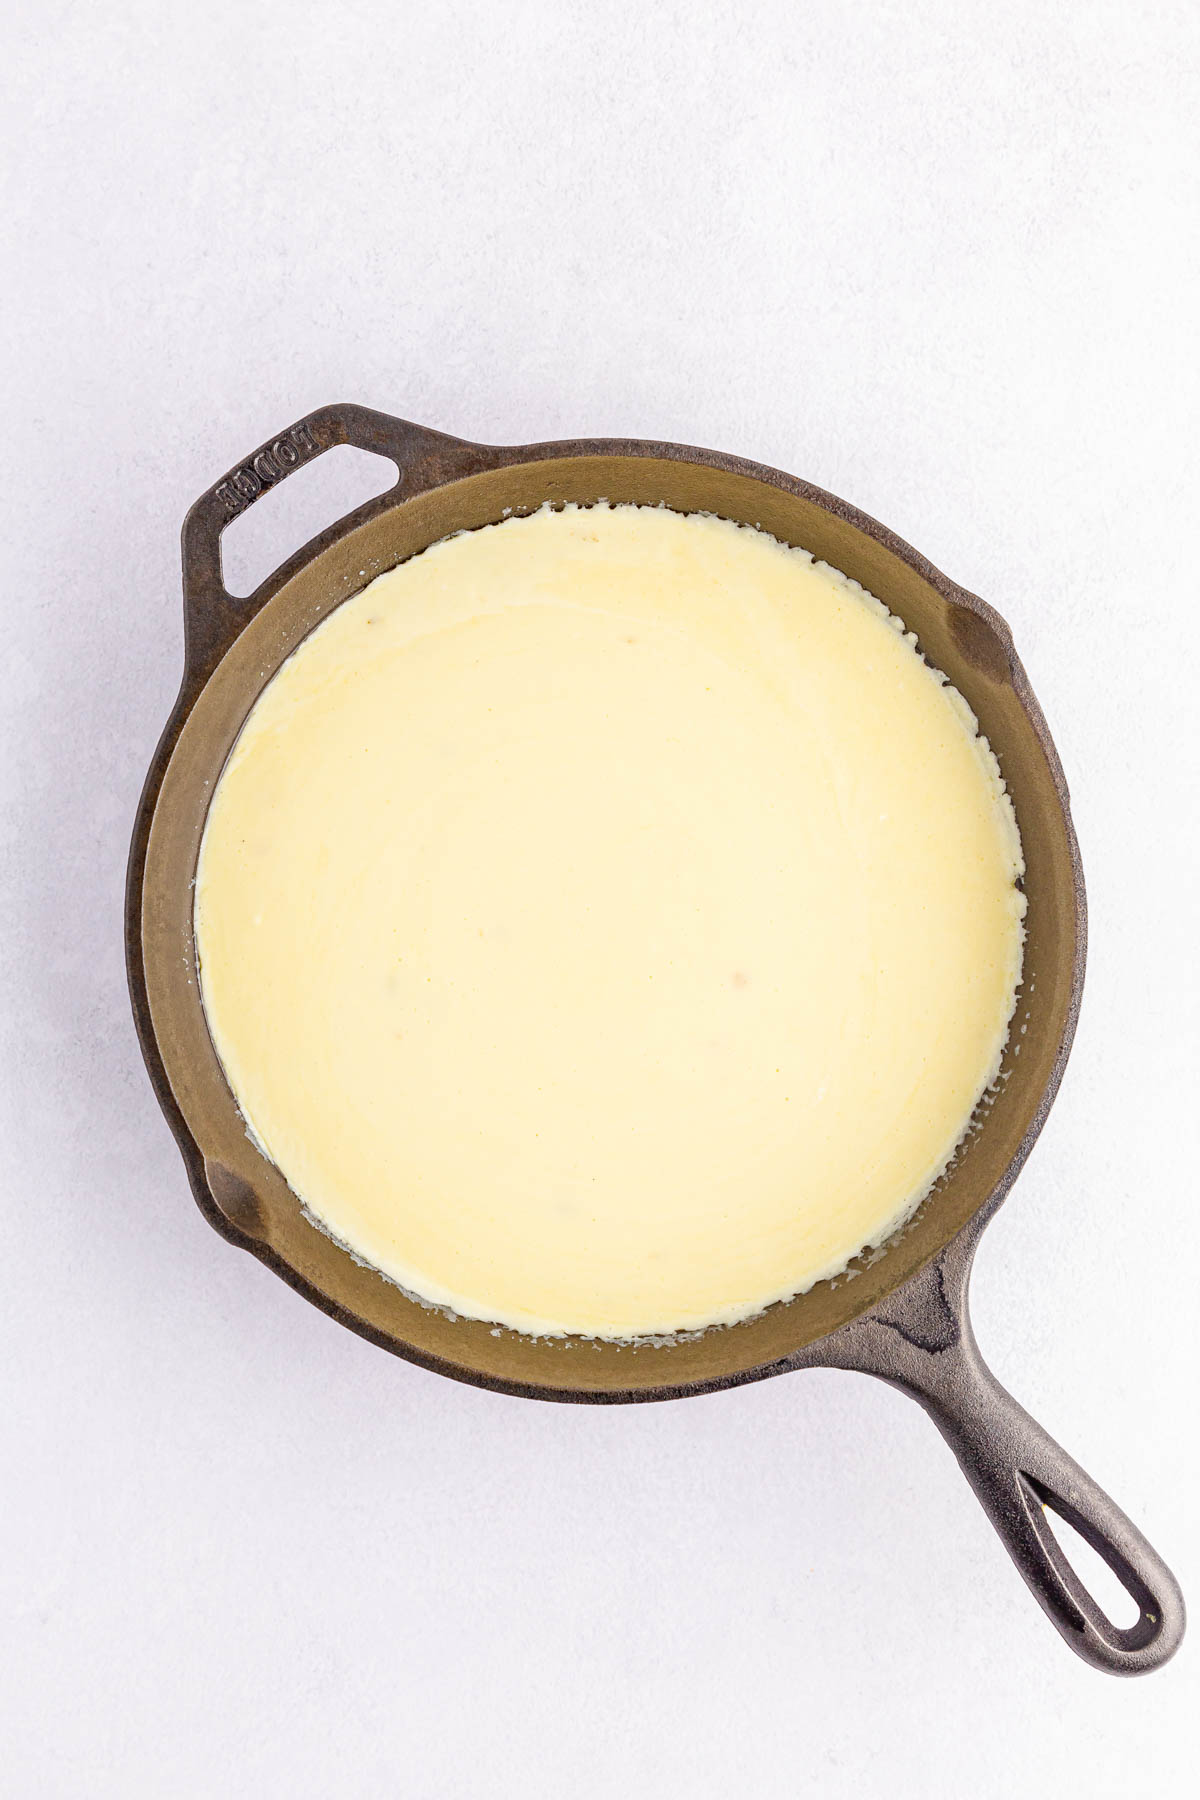 Melted cheese sauce in skillet